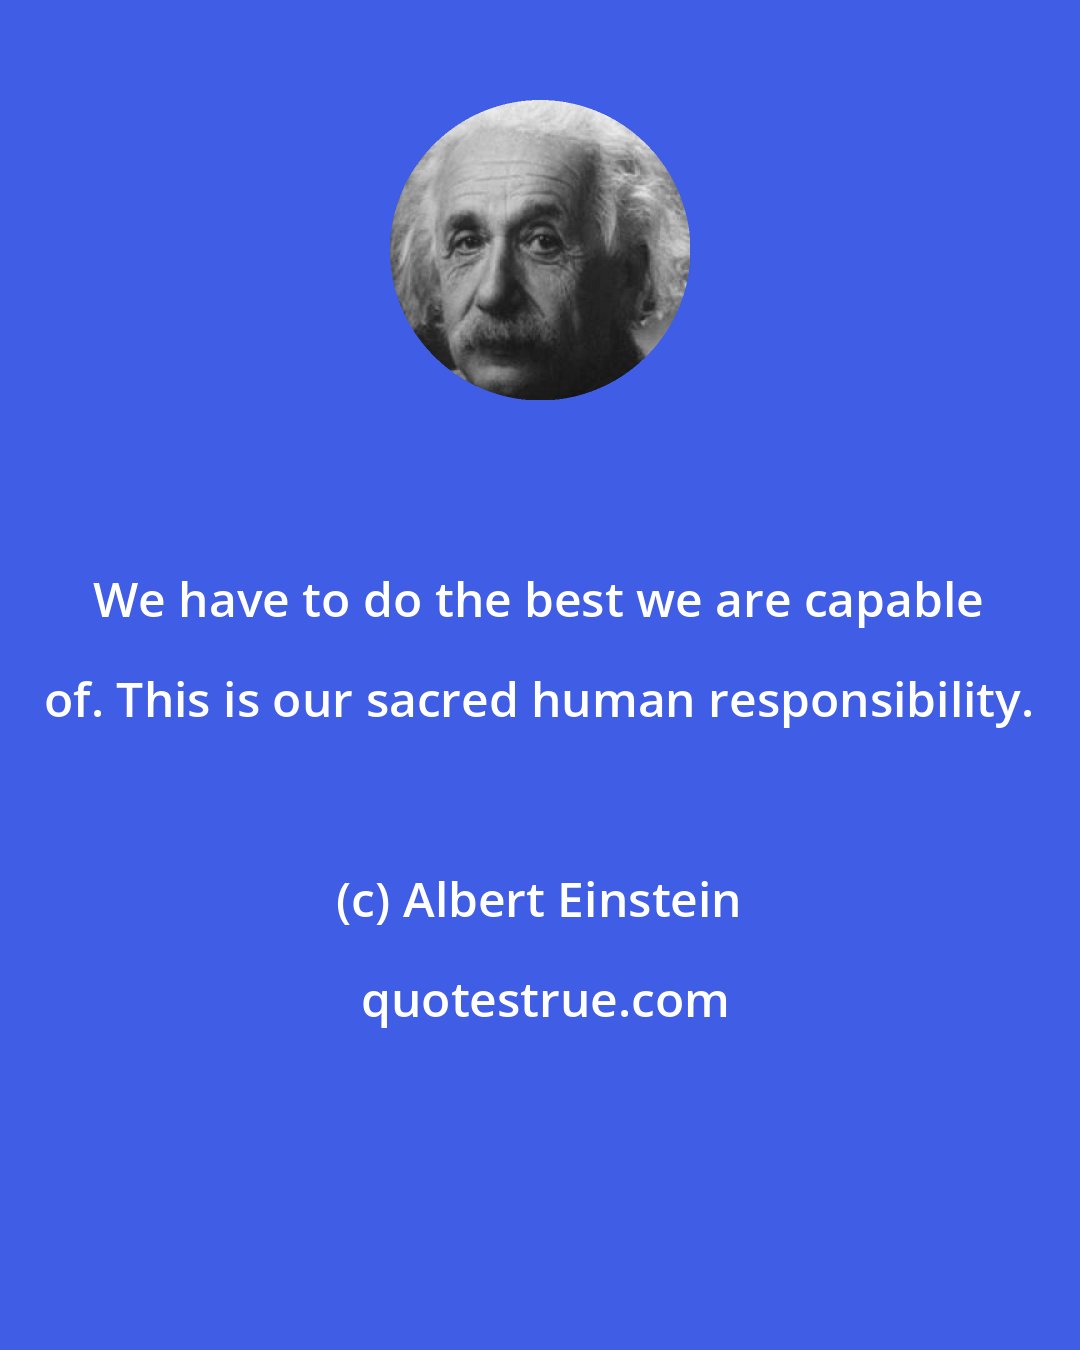 Albert Einstein: We have to do the best we are capable of. This is our sacred human responsibility.